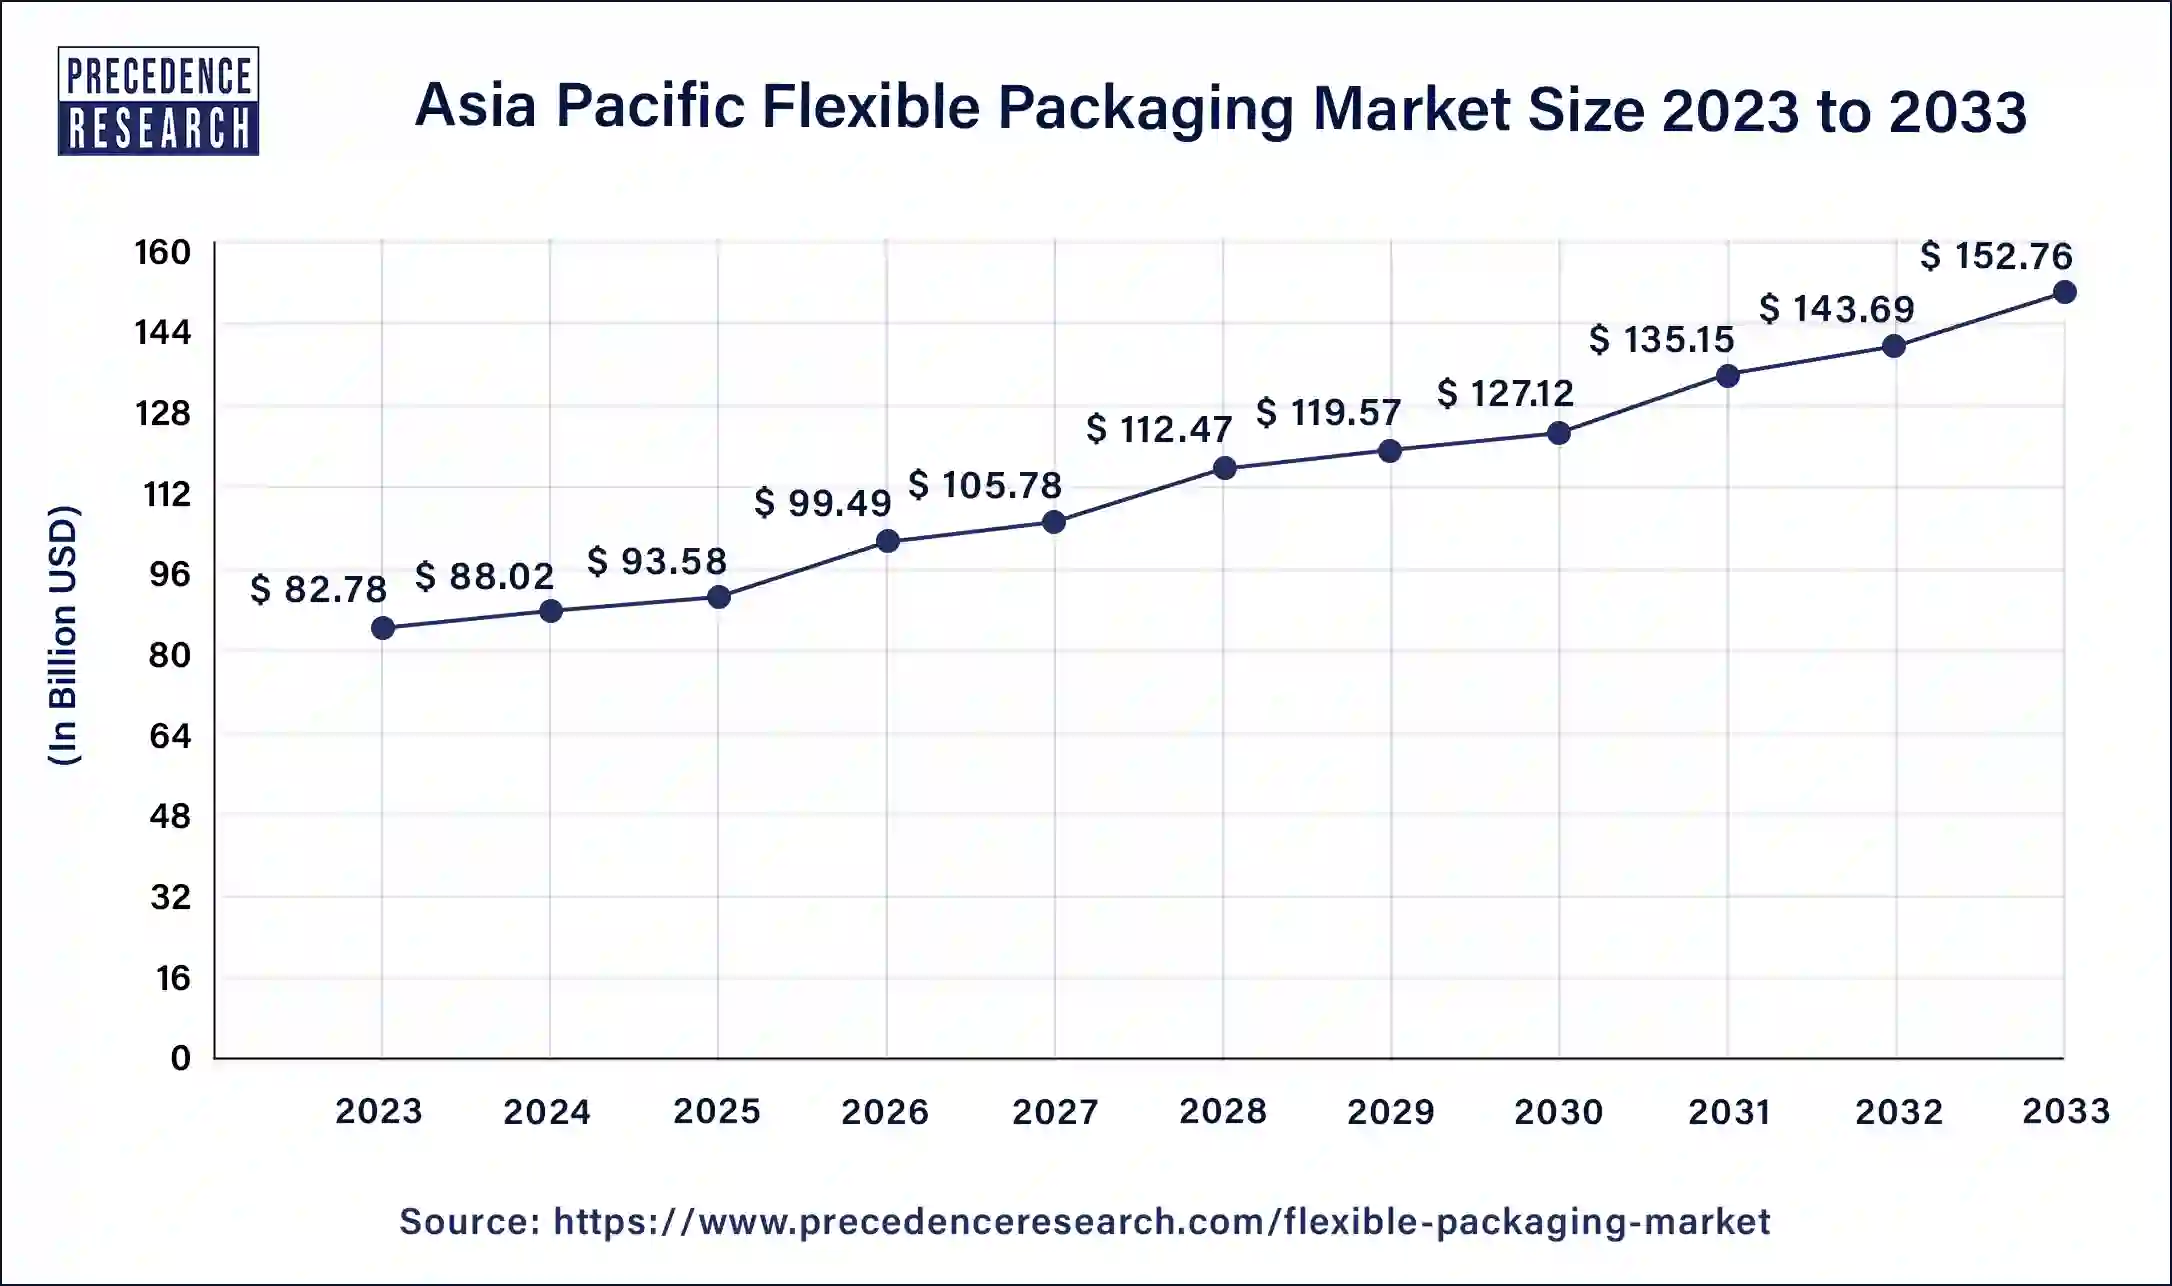 Asia Pacific Flexible Packaging Market Size 2024 to 2033